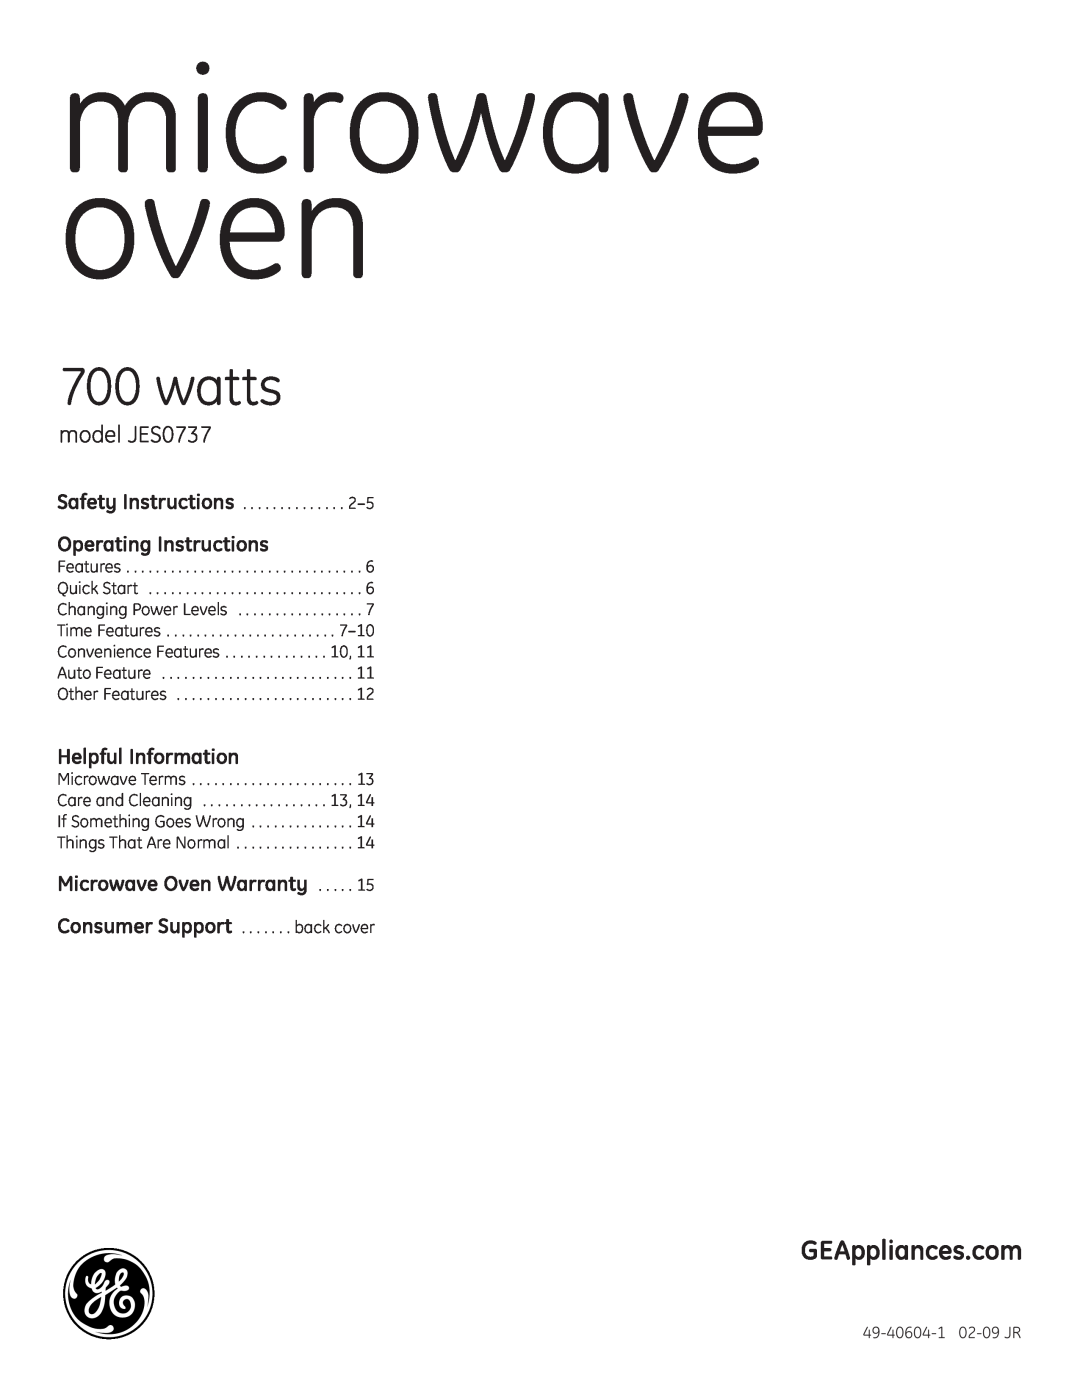 GE JES0737 quick start Operating Instructions, Helpful Information, Microwave Oven Warranty, microwave oven, watts 